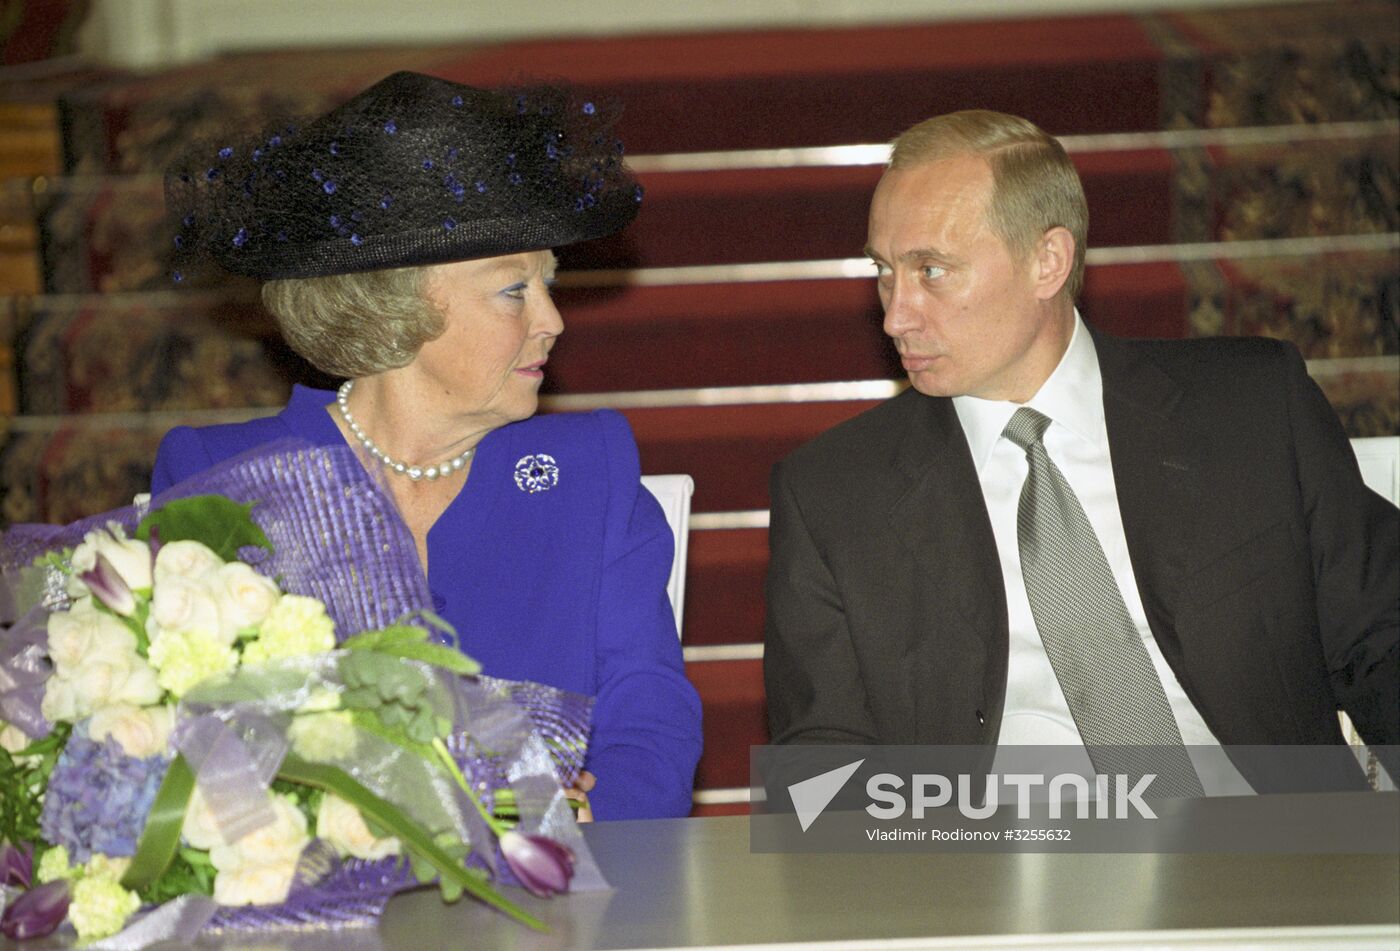 Beatrix of the Netherlands' visit to Russia